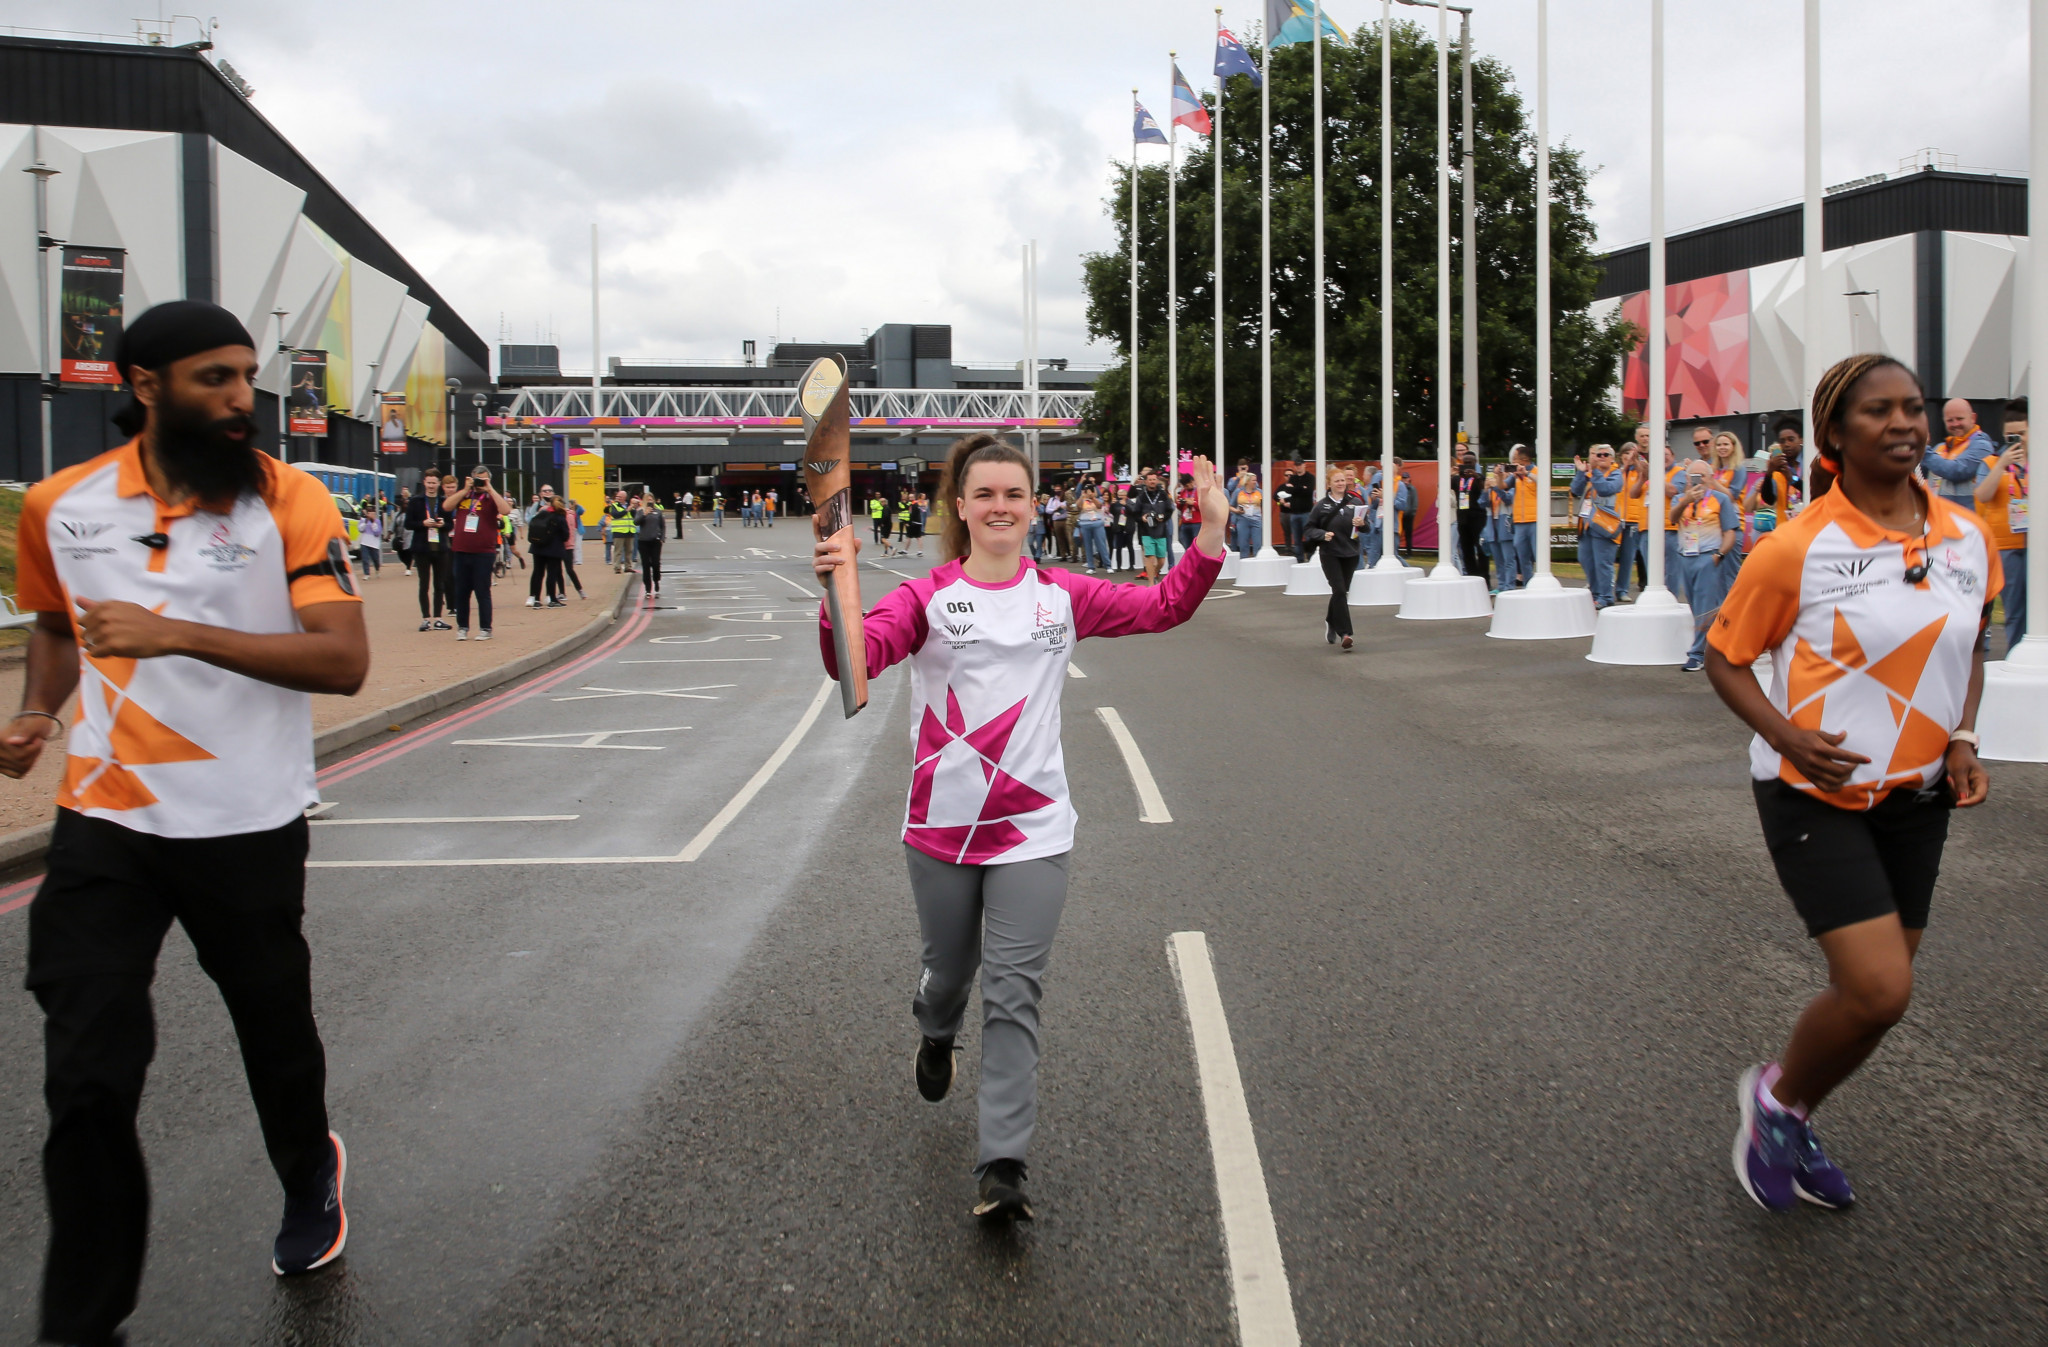 Triathlete Heidi Rhodes-James carried the Baton at the National Exhibition Centre ©Getty Images